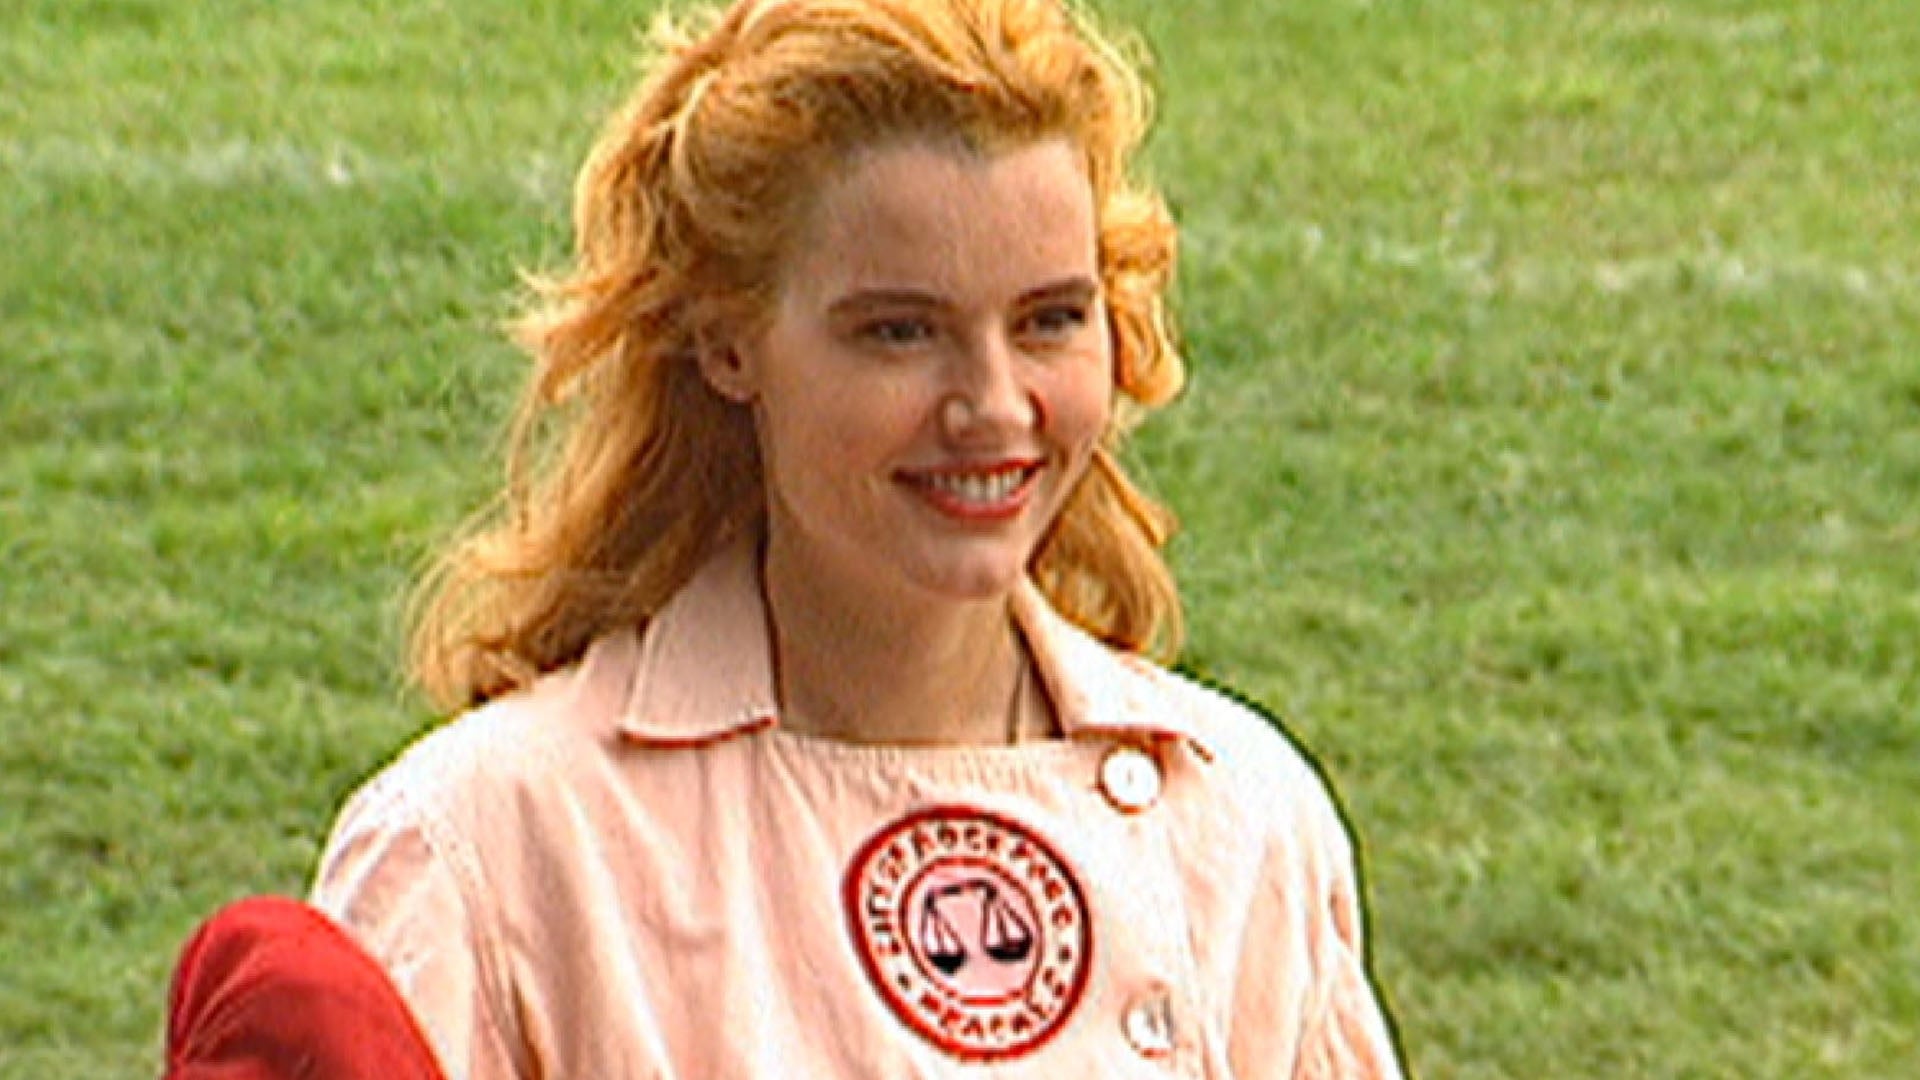 ‘A League of Their Own’ Turns 30! Behind-the-Scenes Secrets and the Real Story Behind the Movie